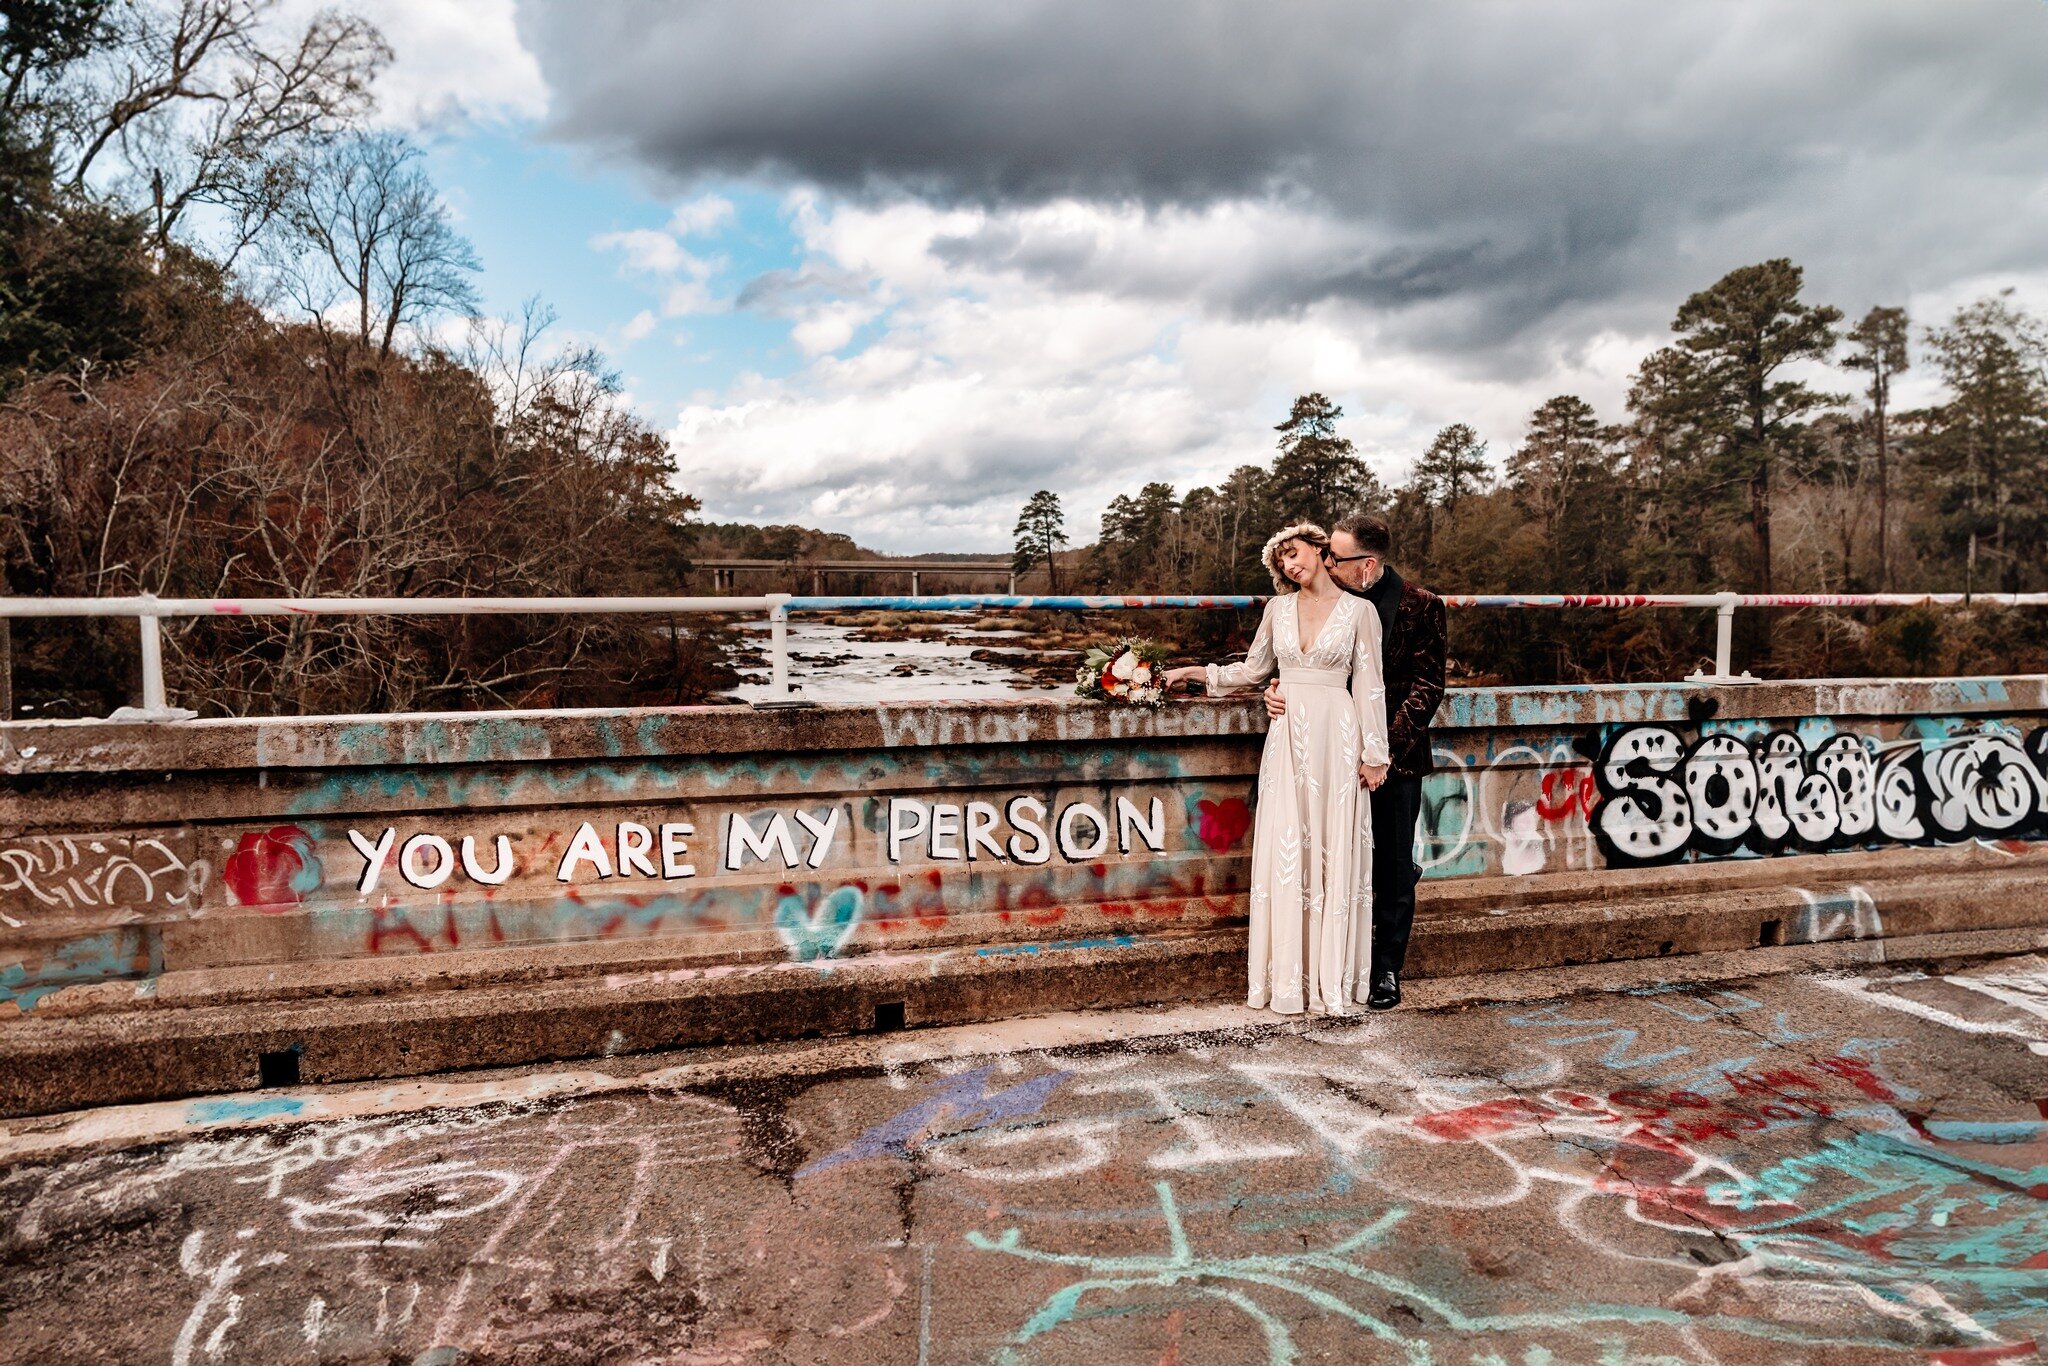 Love and graffiti &mdash; because why settle for ordinary? In a world full of cookie-cutter wedding venues and elopements, let's break the mold and create something truly YOU!
 
🔥 Are you craving something bold, adventurous, and totally YOU? I get i